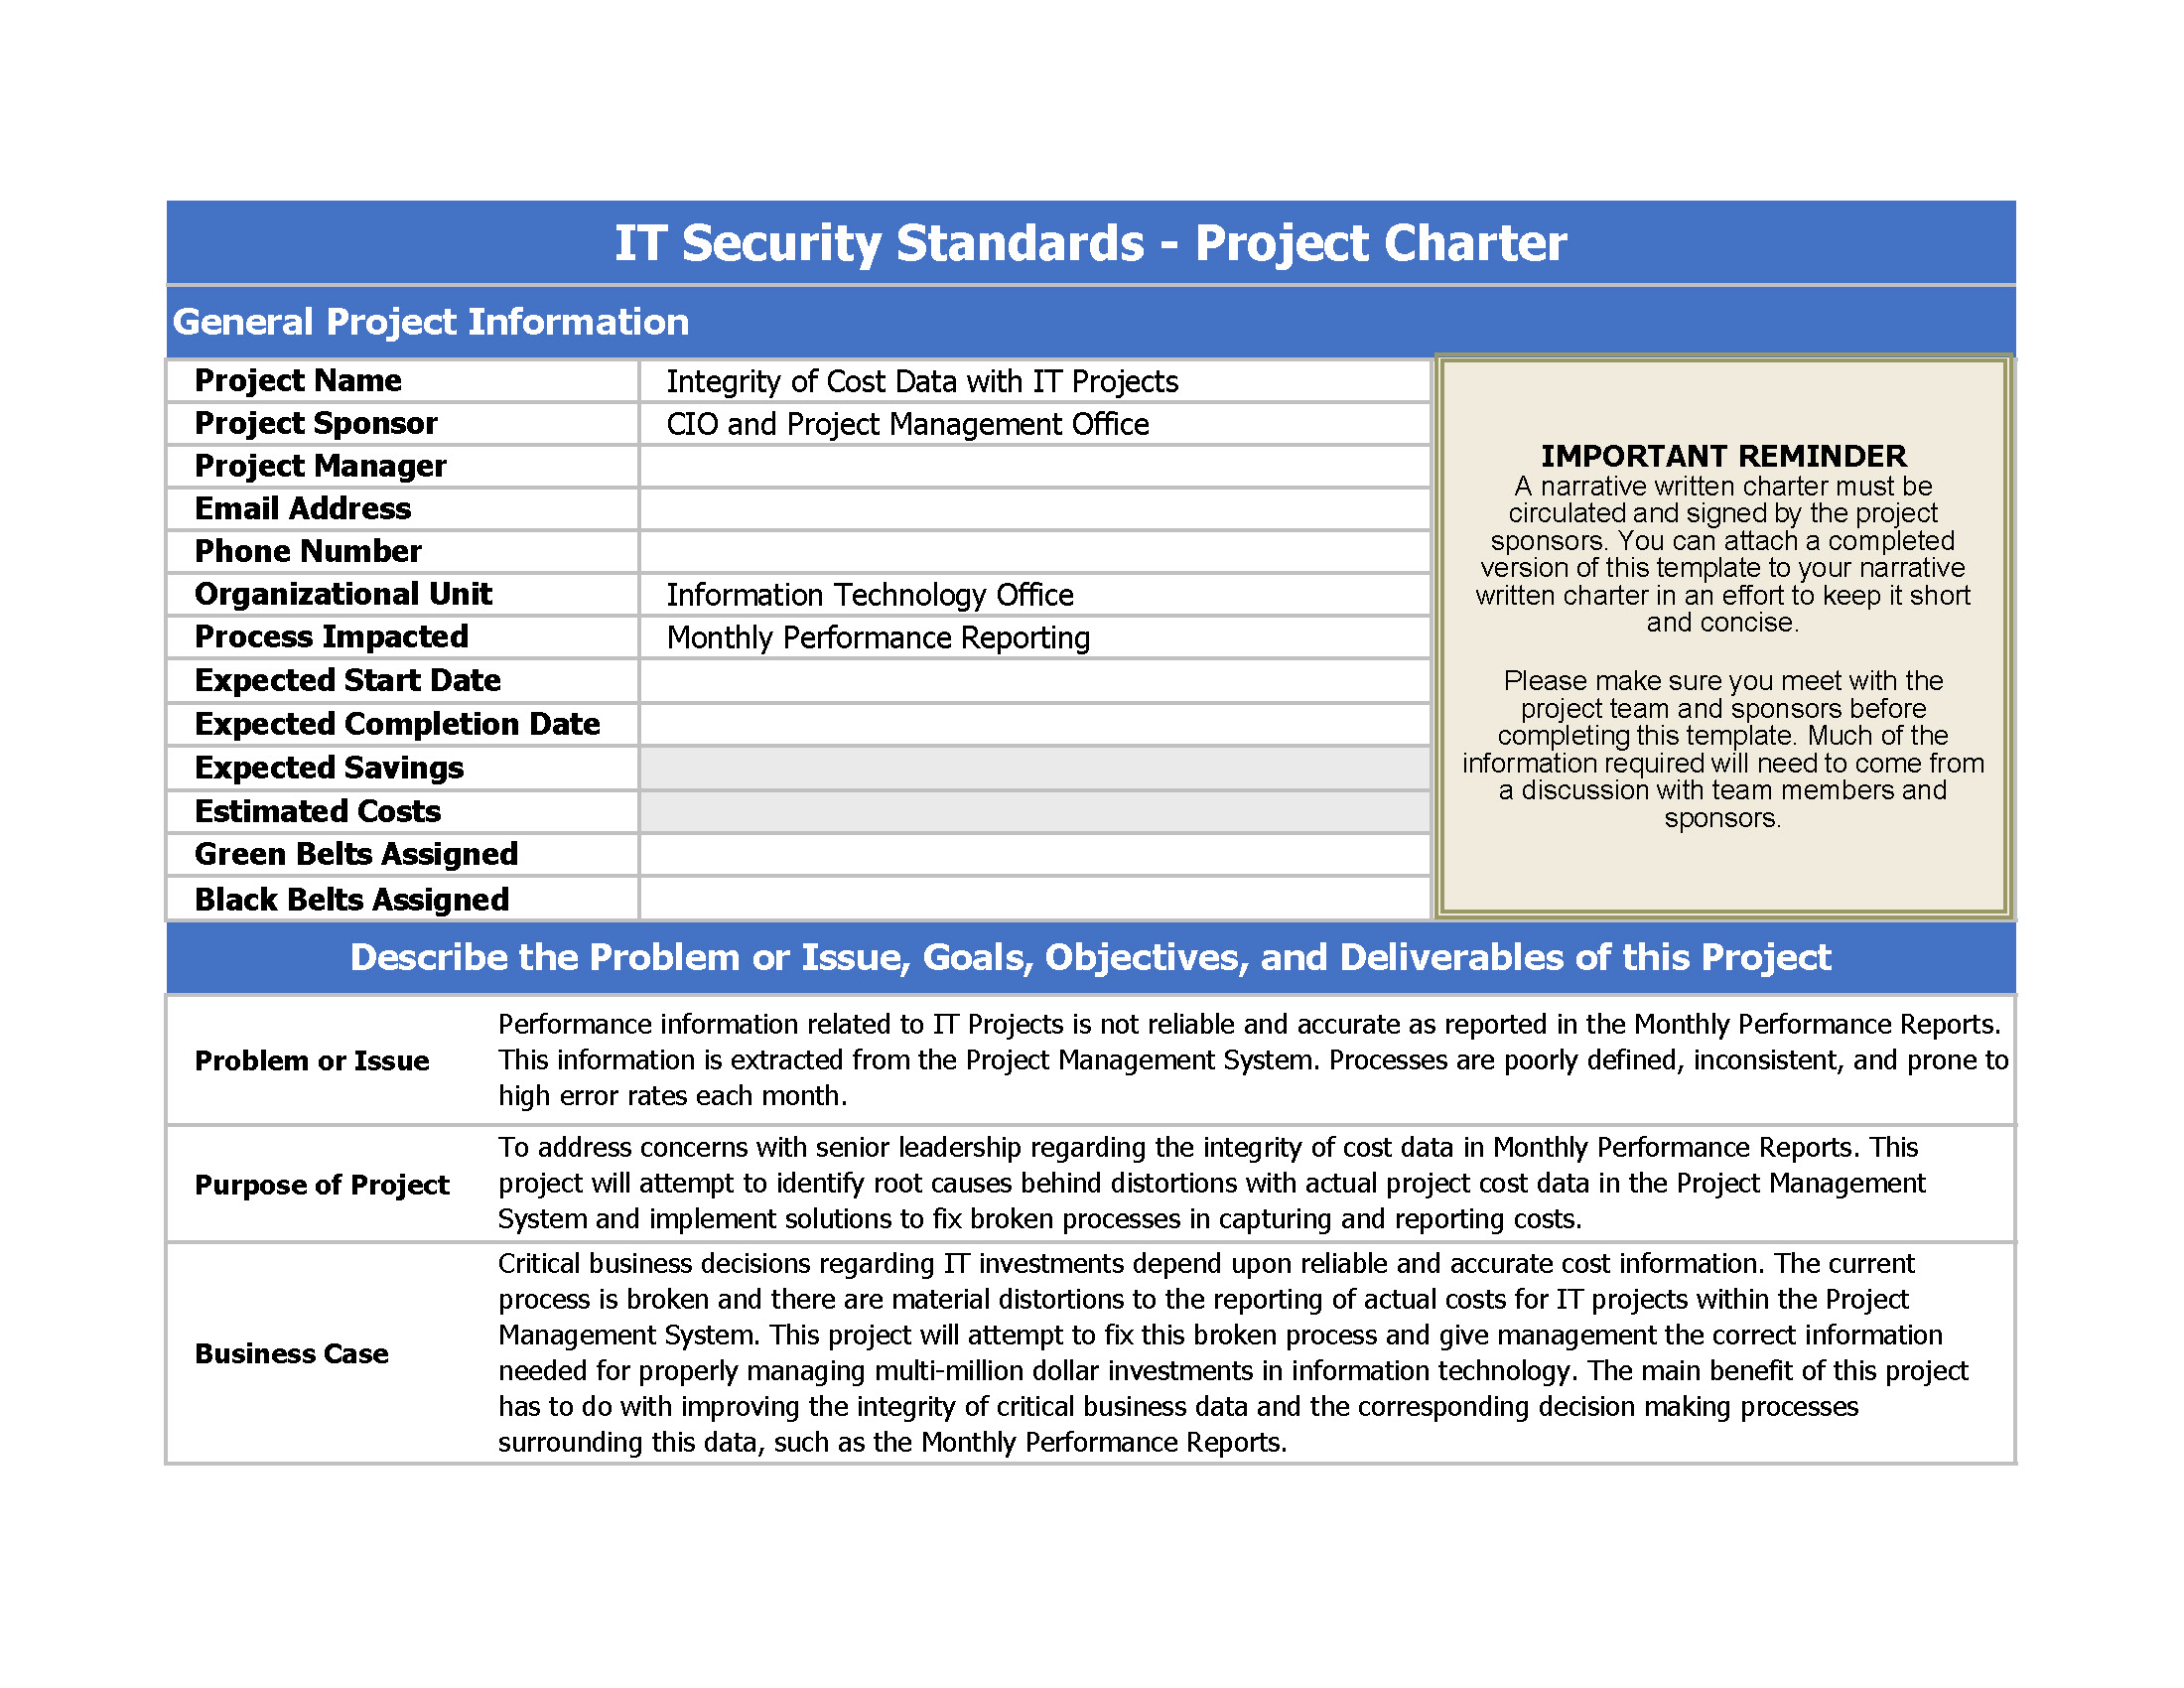 IT Security Compliance Project Charter main image